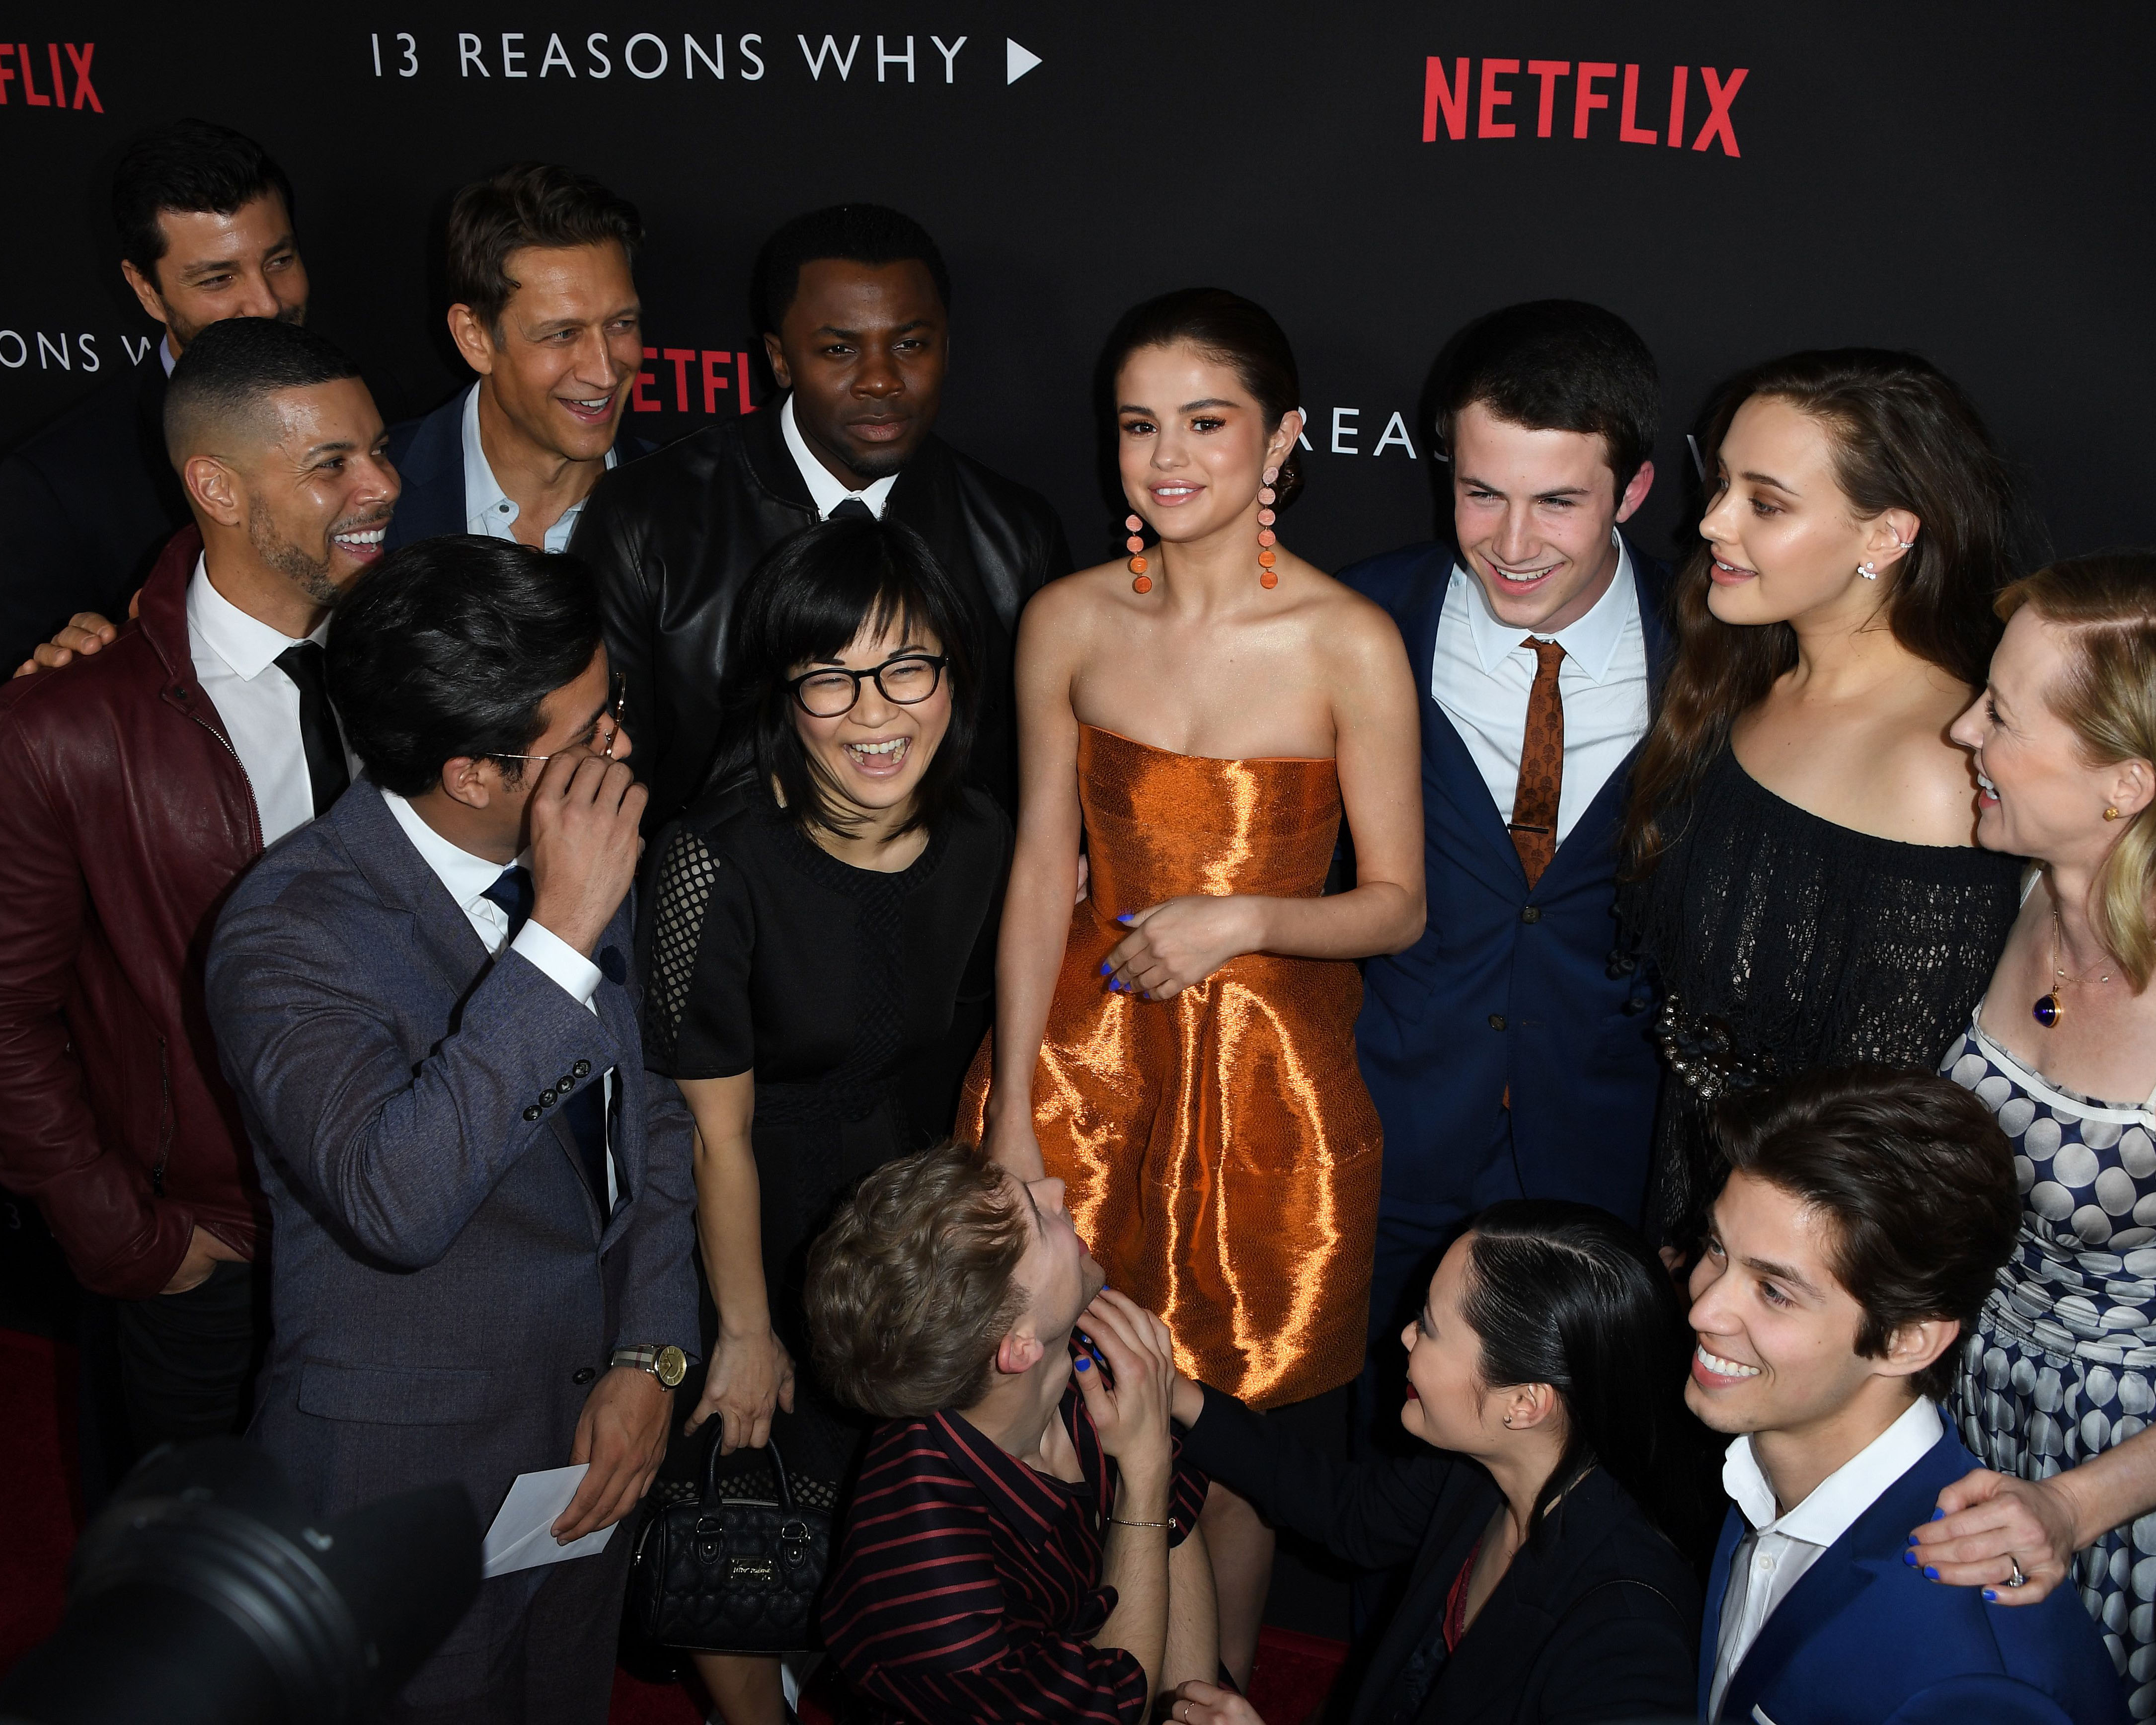 Actress/singer Selena Gomez (C) is surrounded by cast members as they arrive for the premiere Of Netflix's '13 Reasons Why' at Paramount Pictures Studio in Los Angeles, California on March 30, 2017.  / AFP PHOTO / Mark RALSTON        (Photo credit should read MARK RALSTON/AFP/Getty Images)